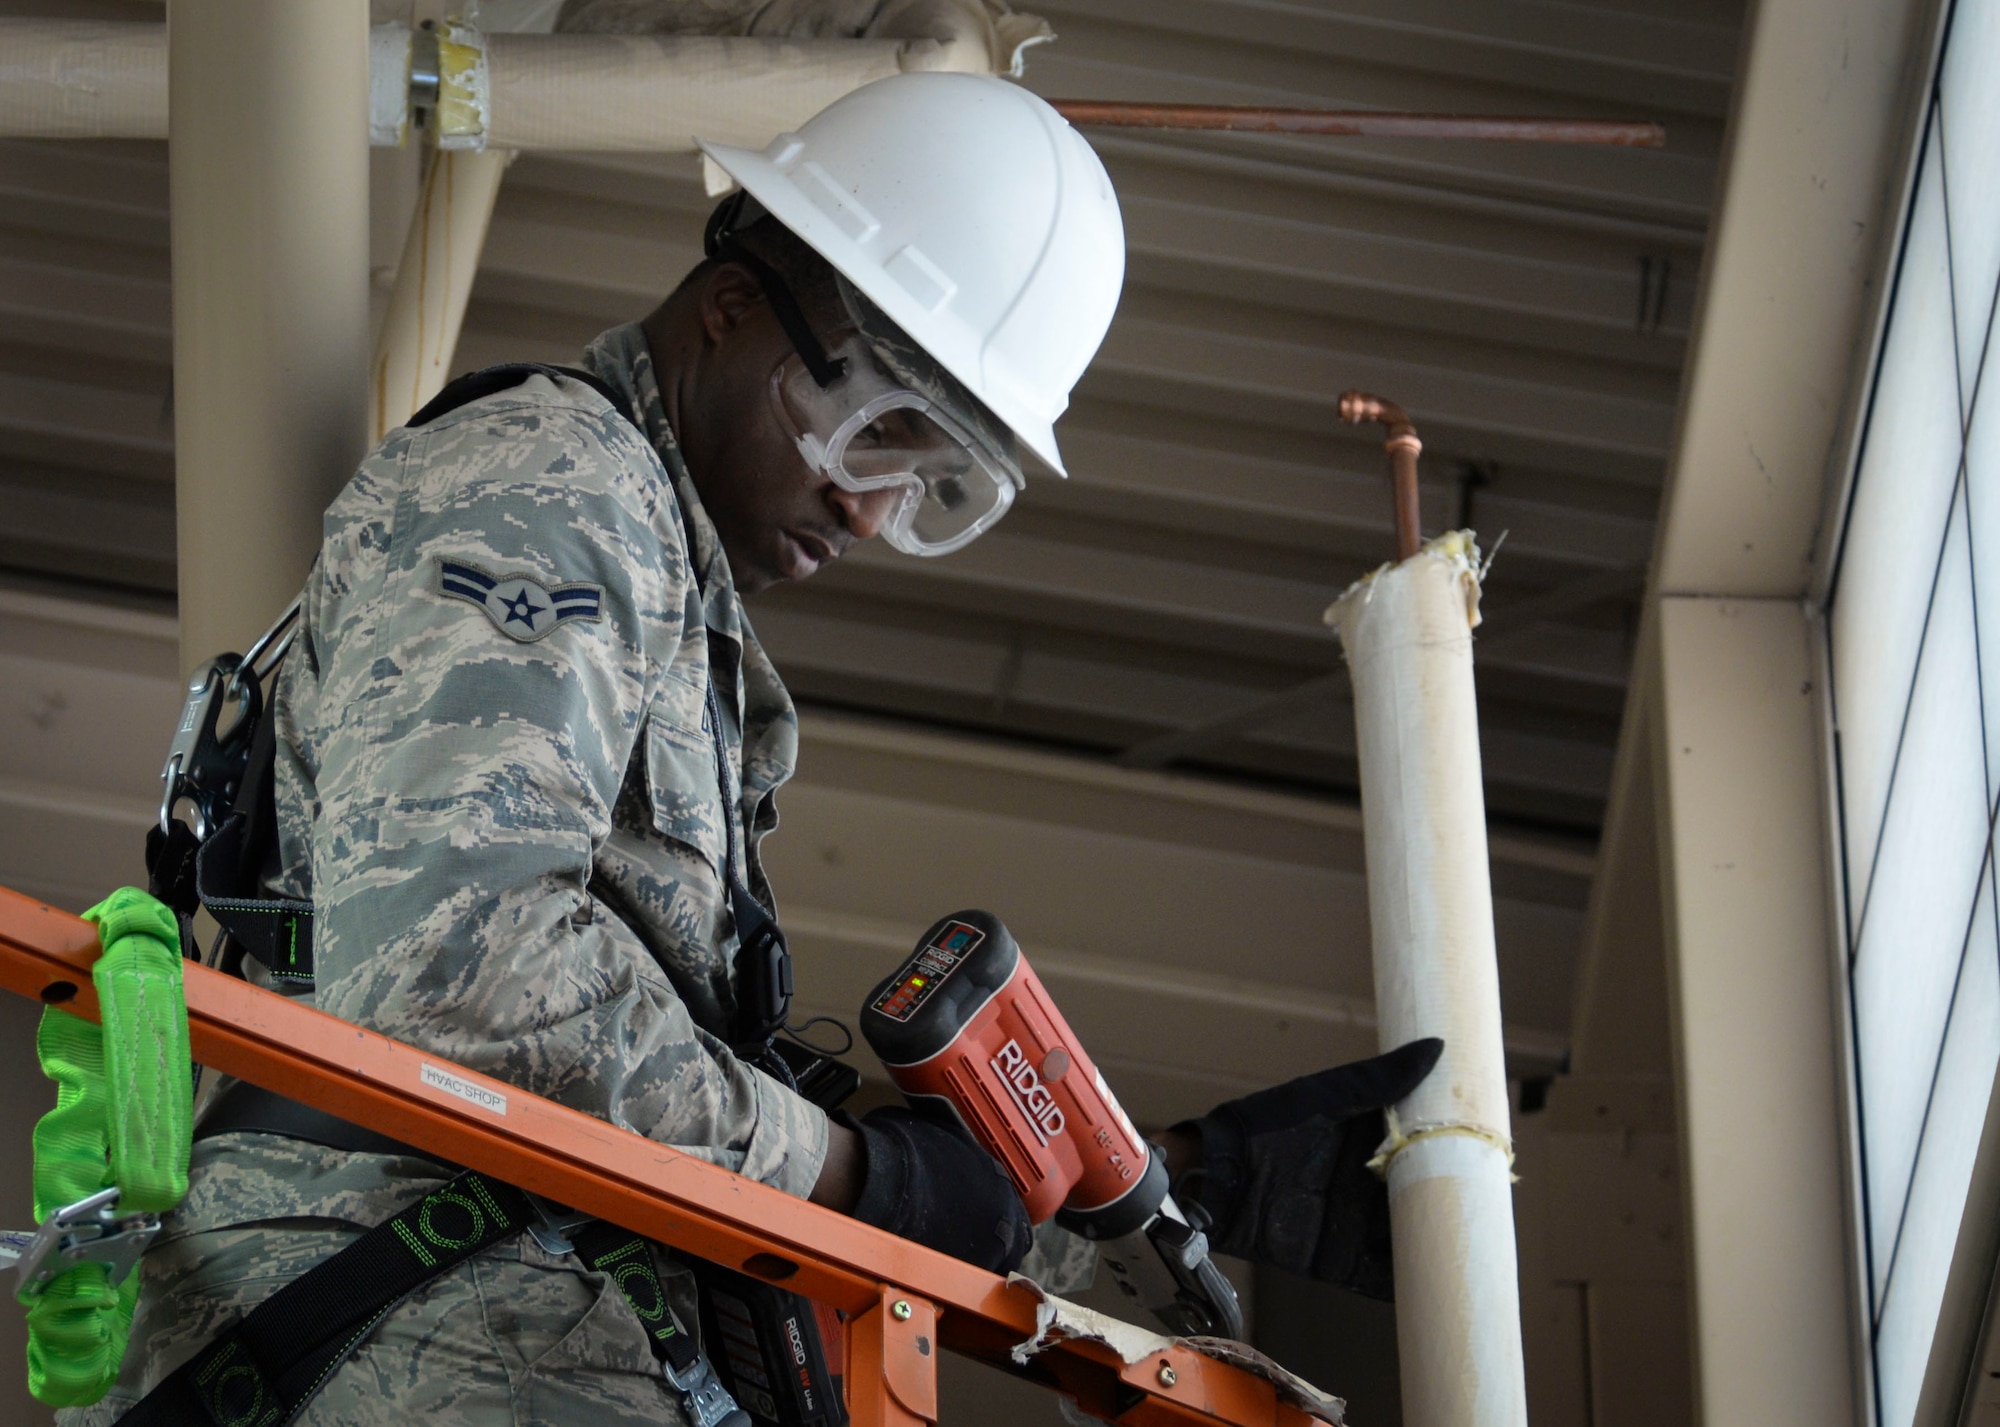 Airman 1st Class Johnathan Daniels, Heating, Ventilation, Air Conditioning/Refrigeration and Control technician assigned to the 99th Civil Engineer Squadron, repairs a broken water pipe at a 57th maintenance facility on Nellis Air Force Base. HVAC technicians are responsible for the maintenance, repair and operations of 661 facilities across Nellis, Creech Air Force Base, and the Nevada Test and Training Range. (U.S. Air Force photo by Airman Bailee A. Darbasie)